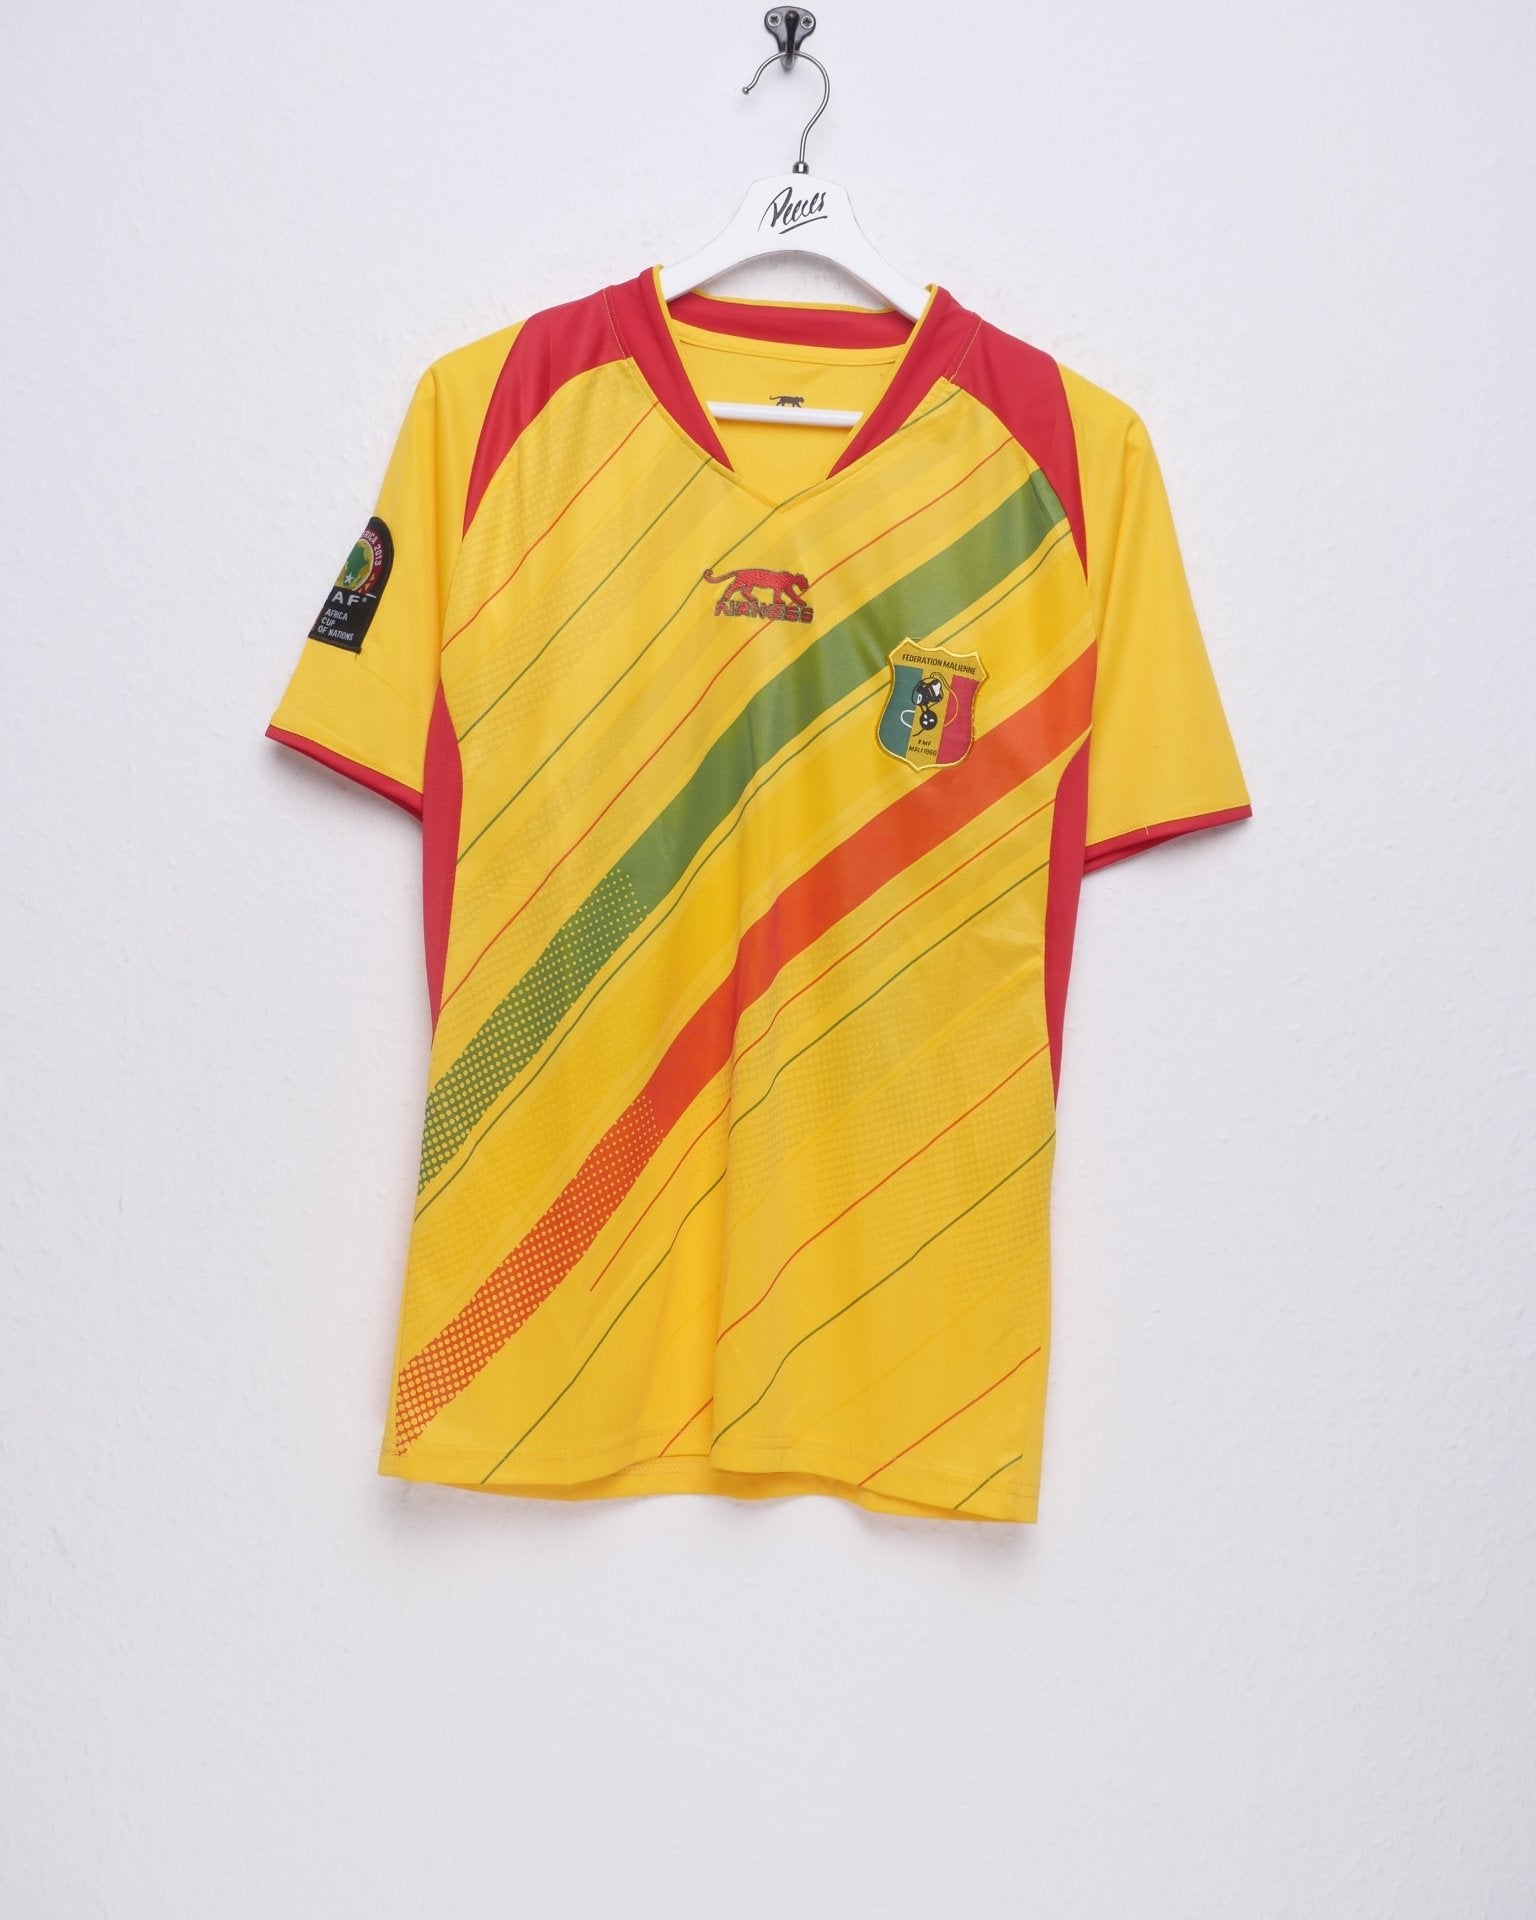 Airness Africa Cup of Nations 2013 Federation Malienne Gio embroidered Logo Soccer Jersey Shirt - Peeces